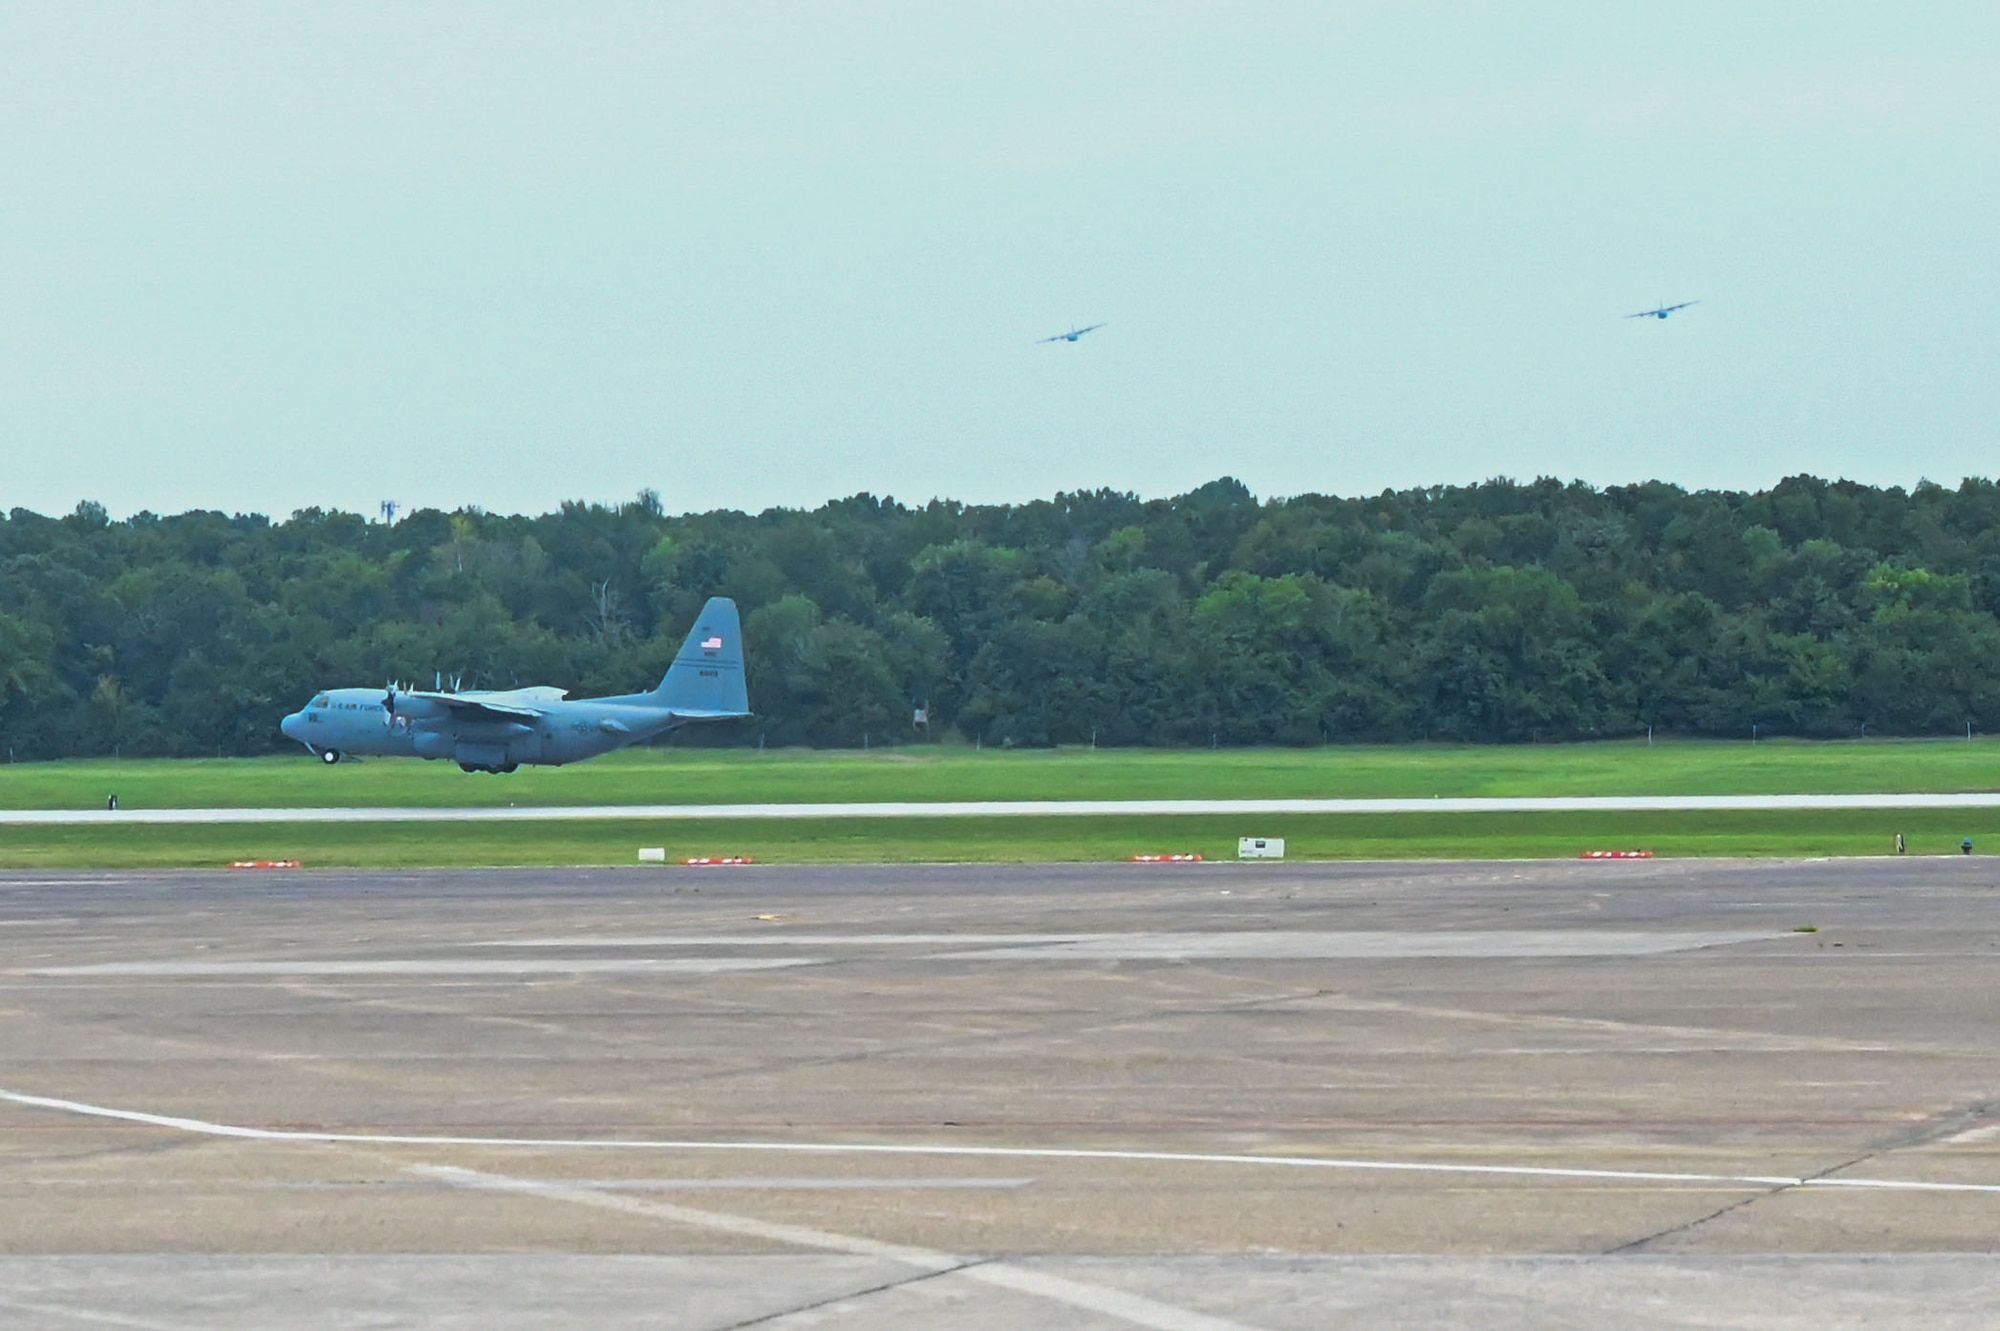 A C-130 takes off from the runway.